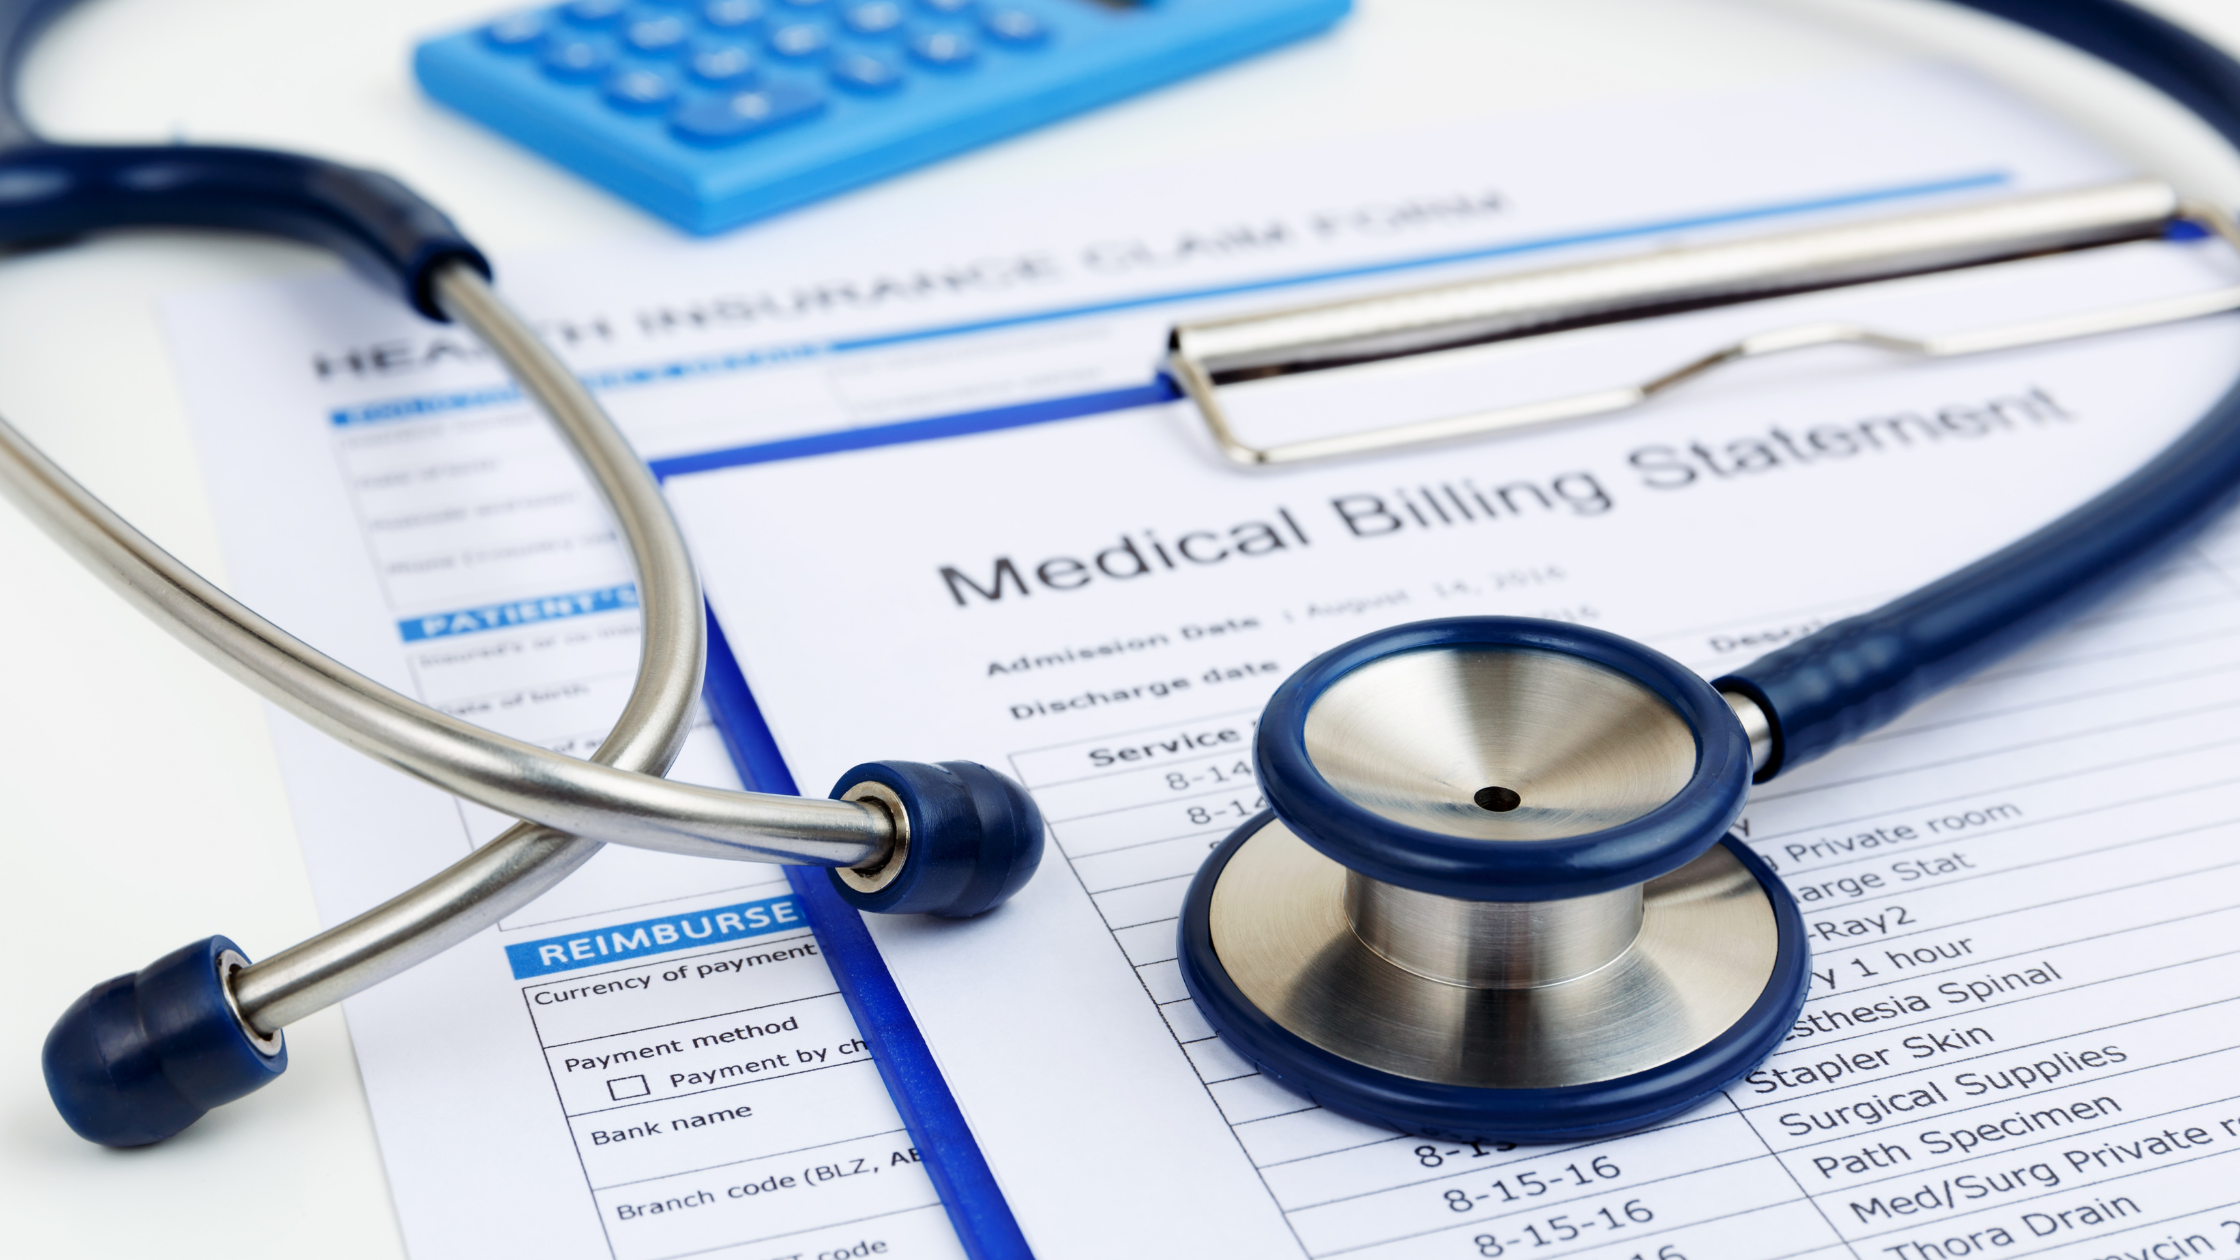 medical billing statement outsourcing